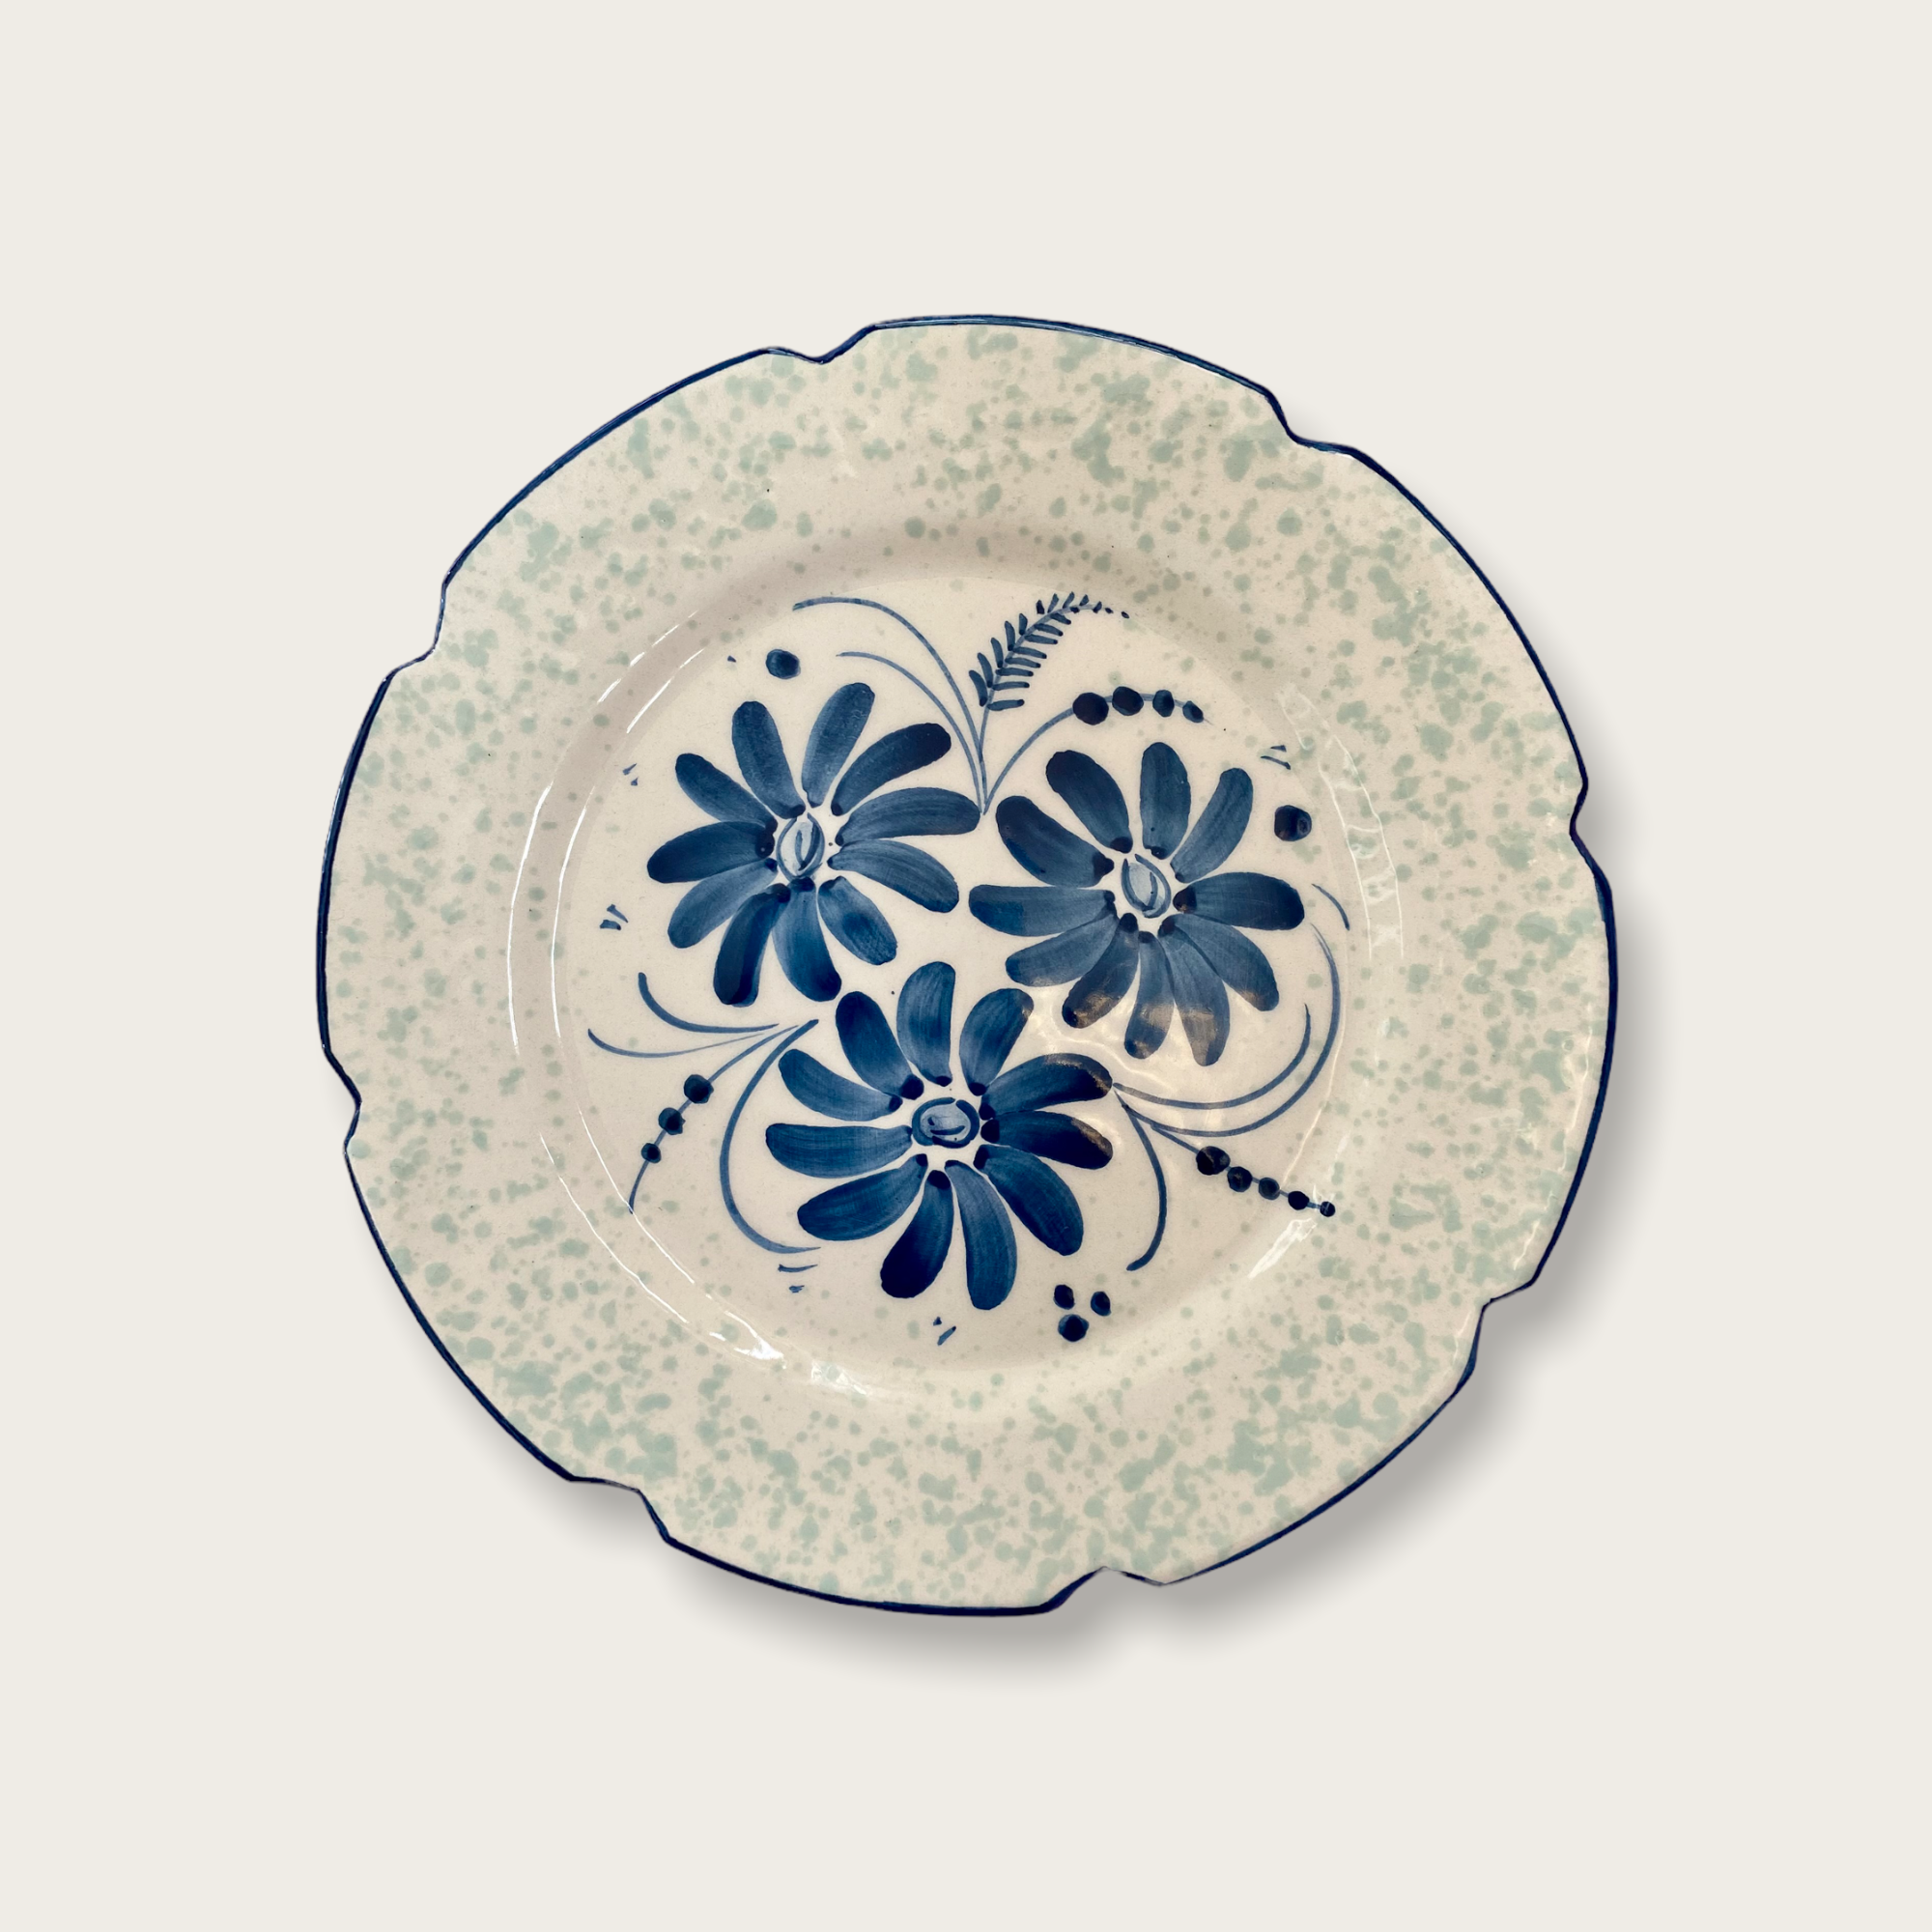 Aceramic plate that features a trio of blue/ indigo flowers and an indigo scalloped edge. The floral design is surrounded by a contrasting and unique scalloped rim with a mint green speckled pattern. .